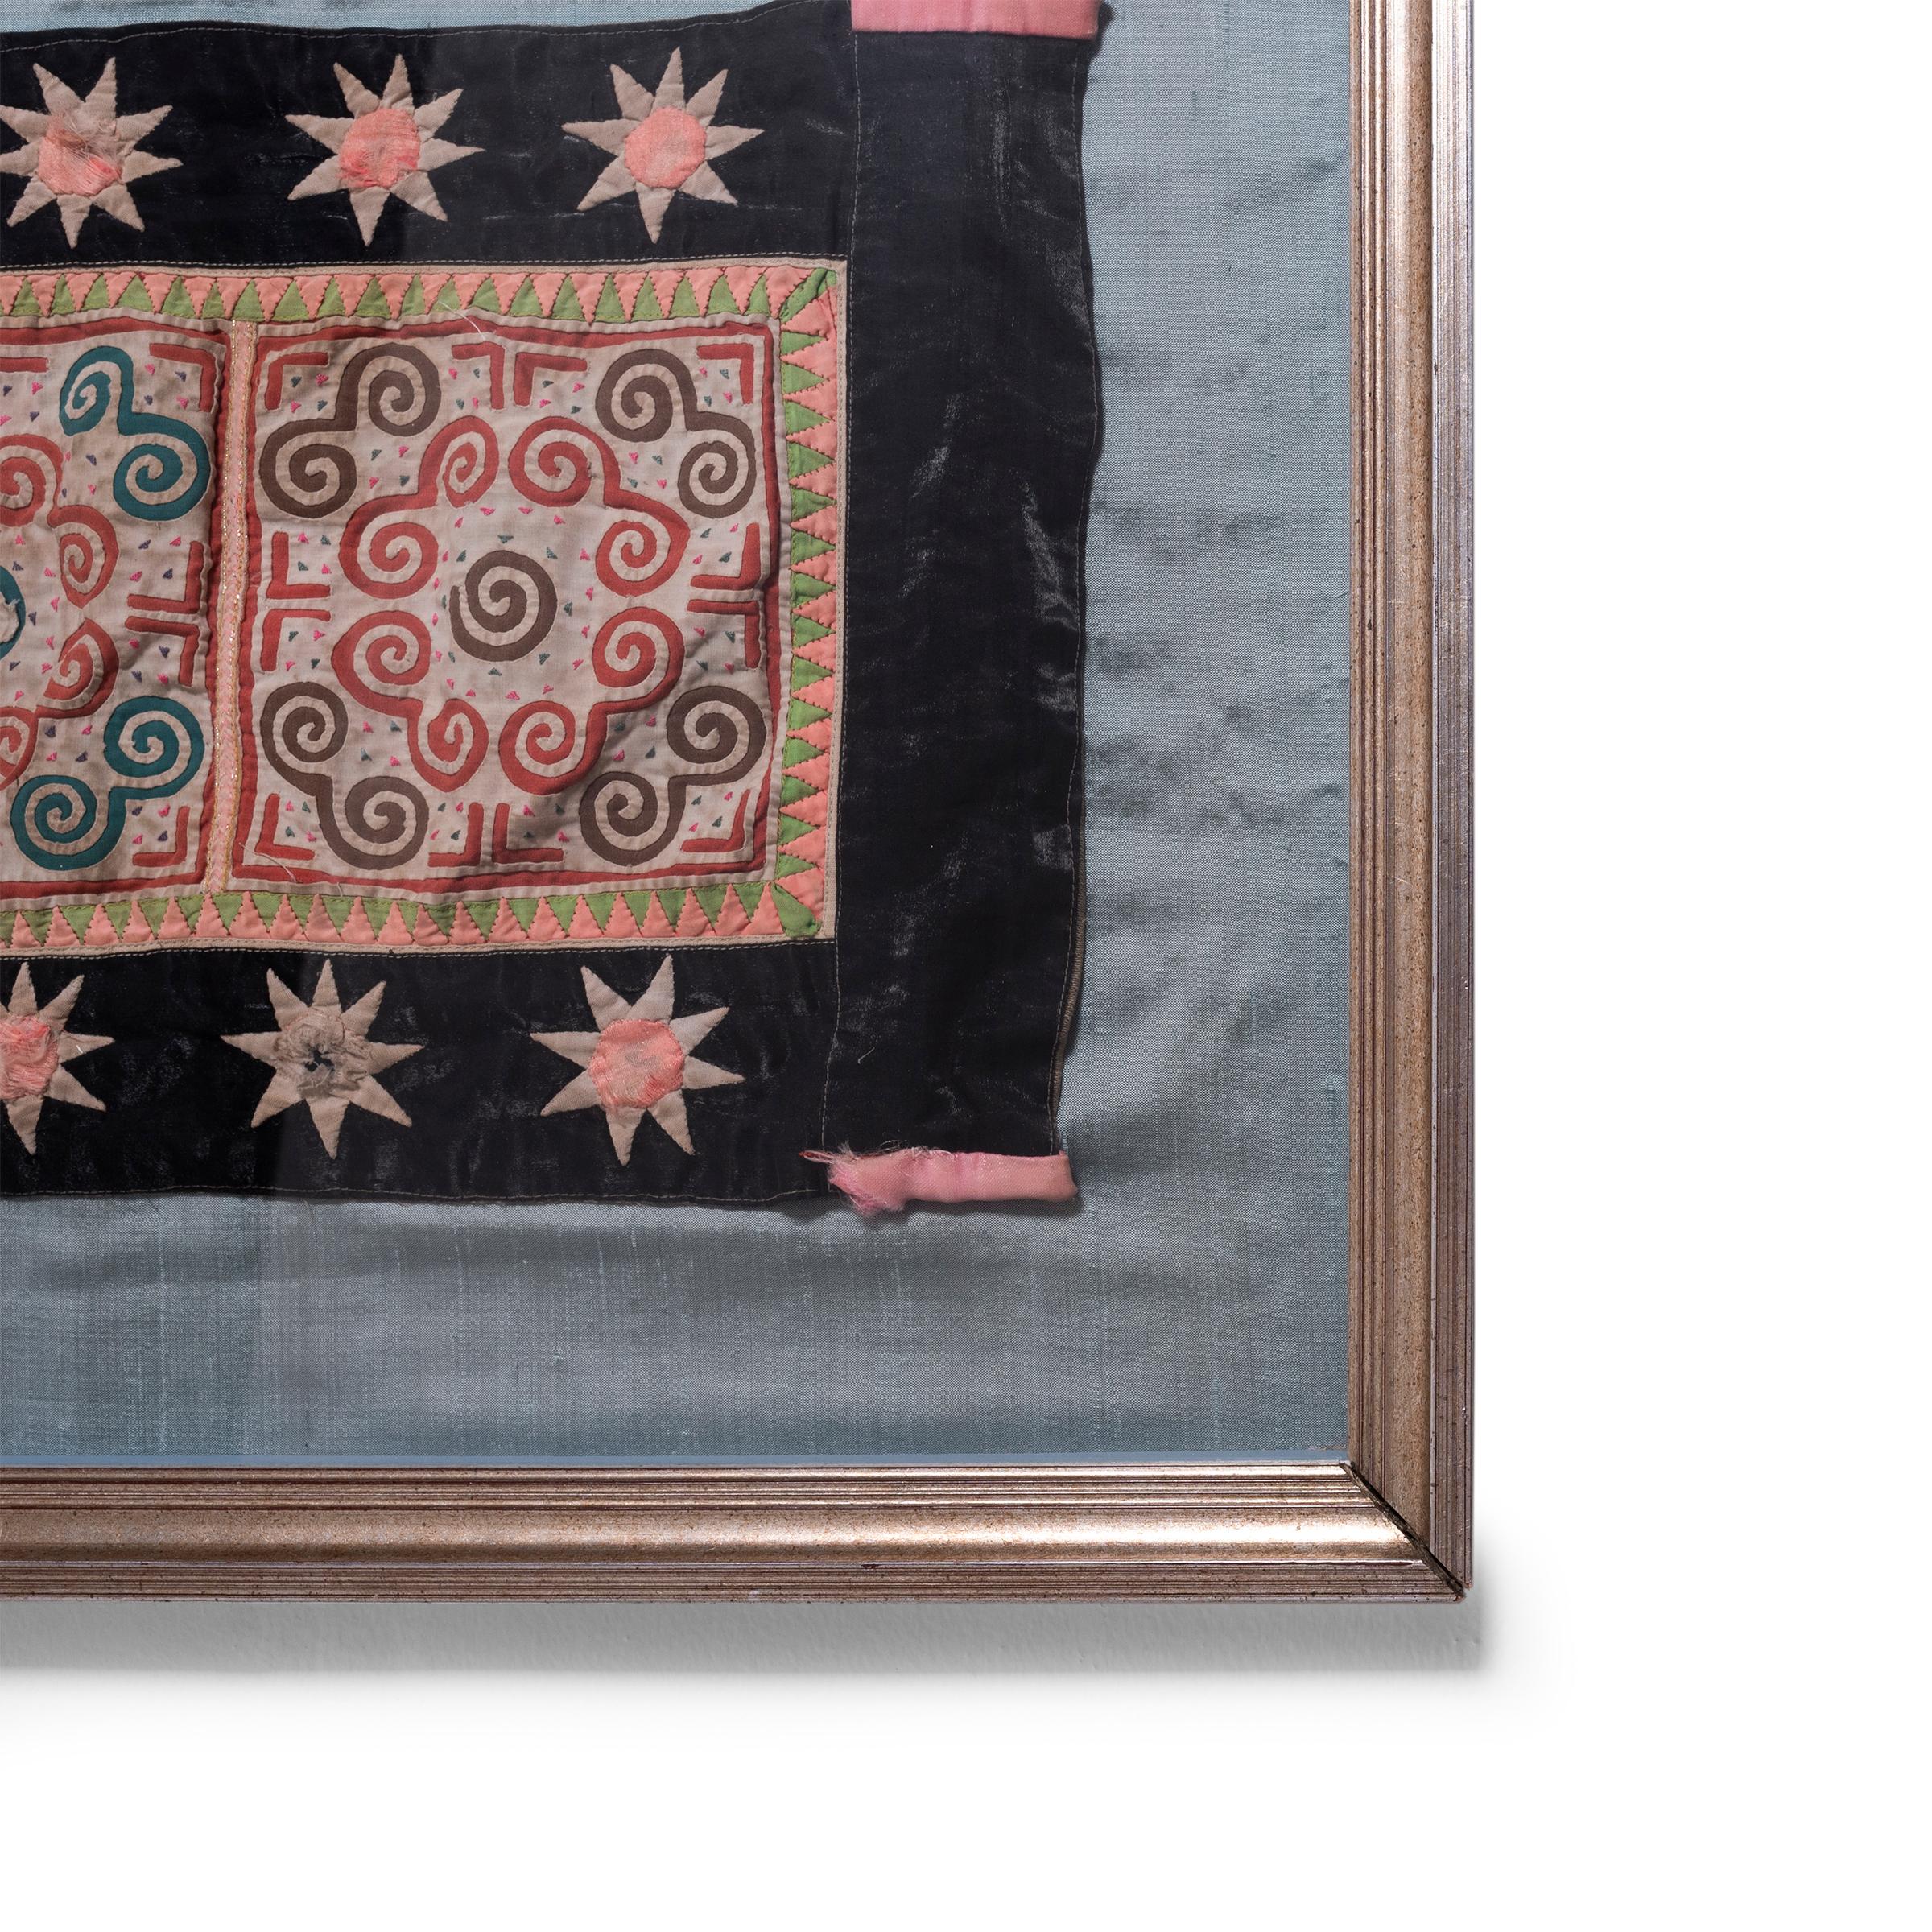 Dating to the mid-20th century, this colorful Hmong textile is a classic example of the appliqué technique used for the traditional cloth known as paj ntaub. Appliqué is the process by which patches of fabric are sewn onto a different piece of